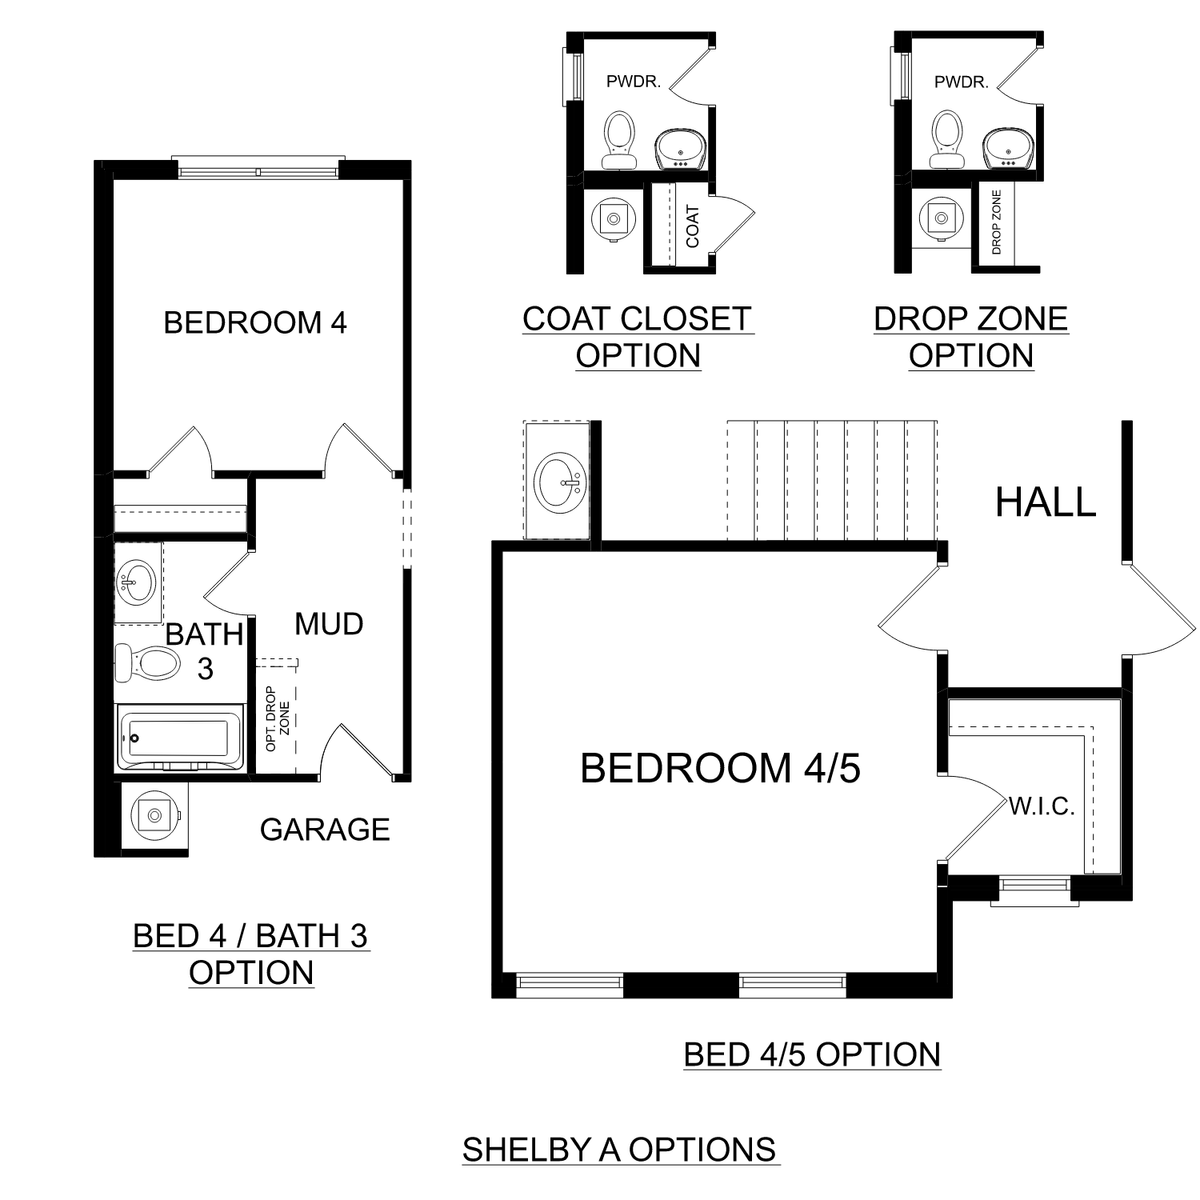 3 - The Shelby A floor plan layout for 2148 Mcafee Road in Davidson Homes' The Reserve at North Ridge community.